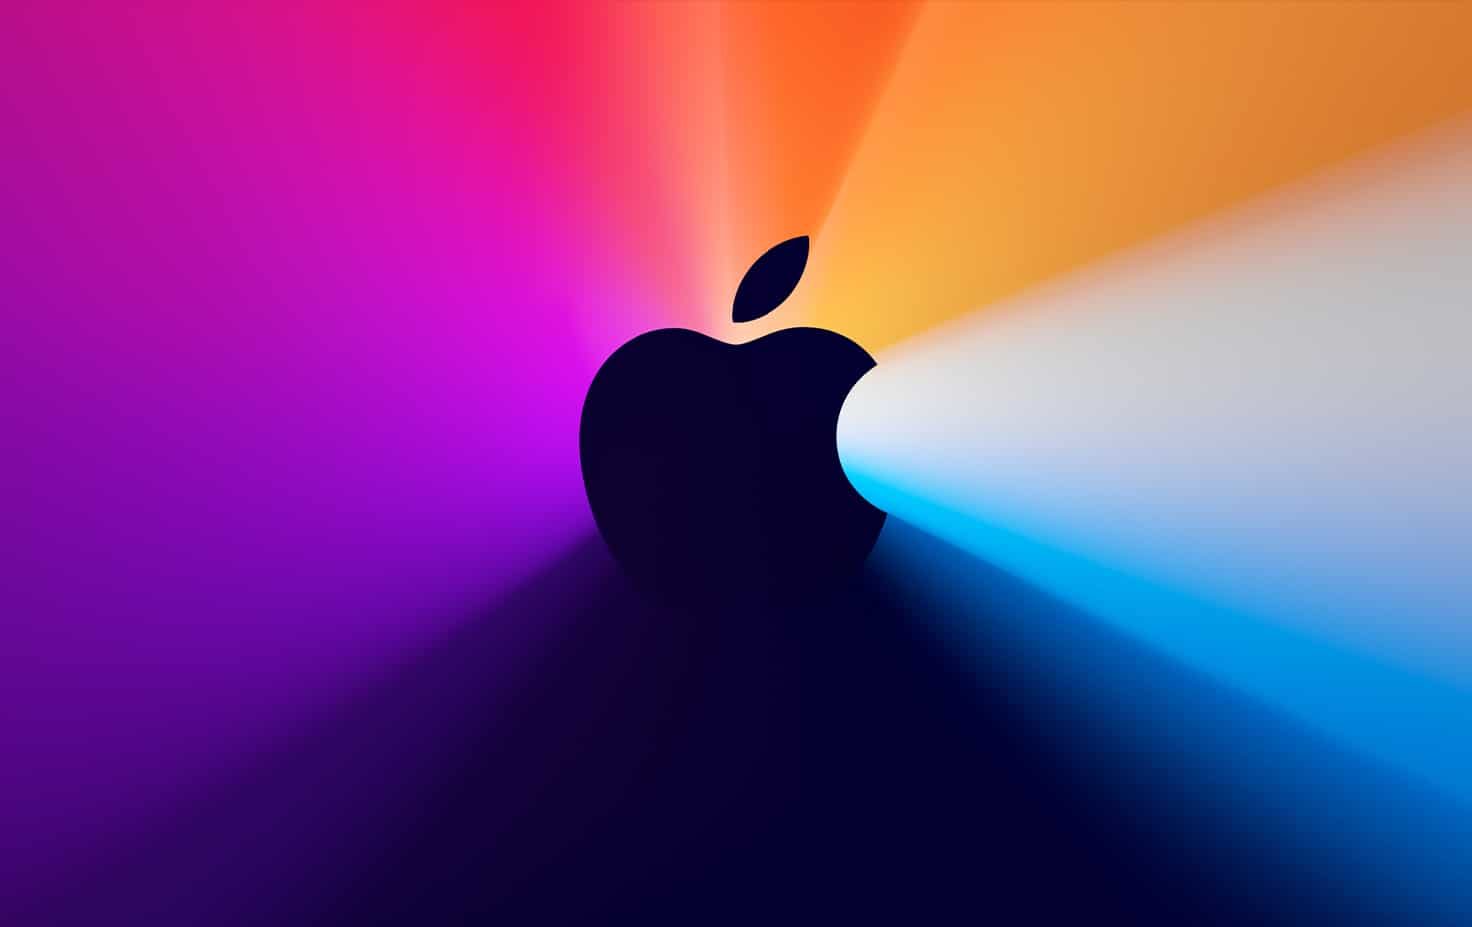 One more thing - Apple Event